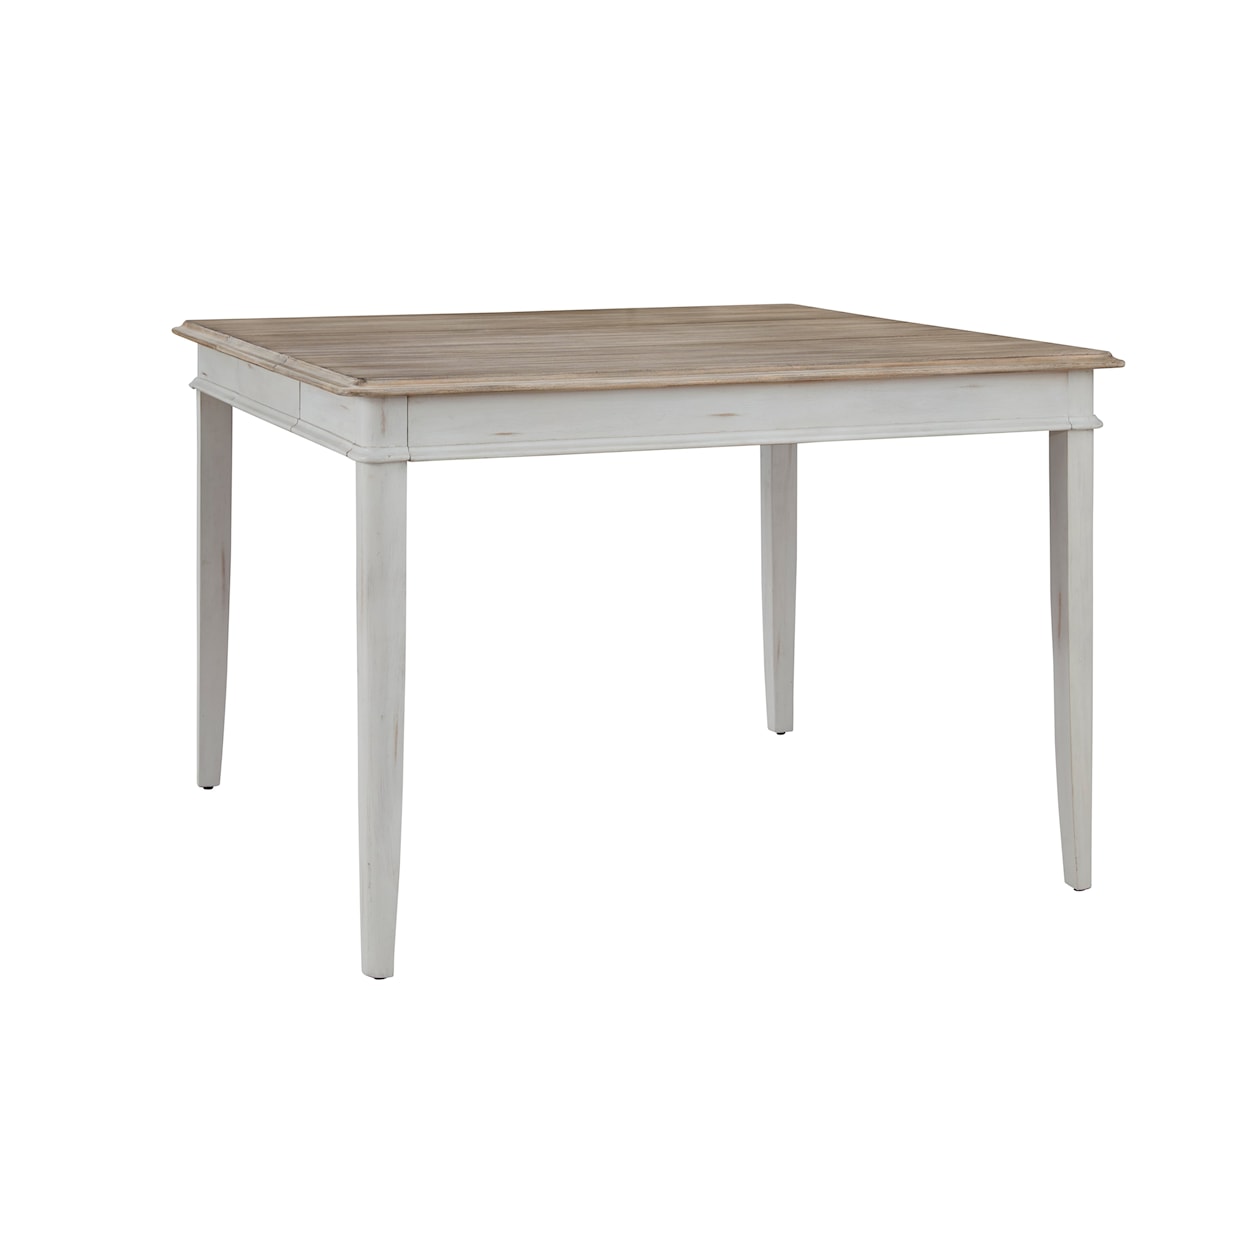 American Woodcrafters Beach Comber Dining Table